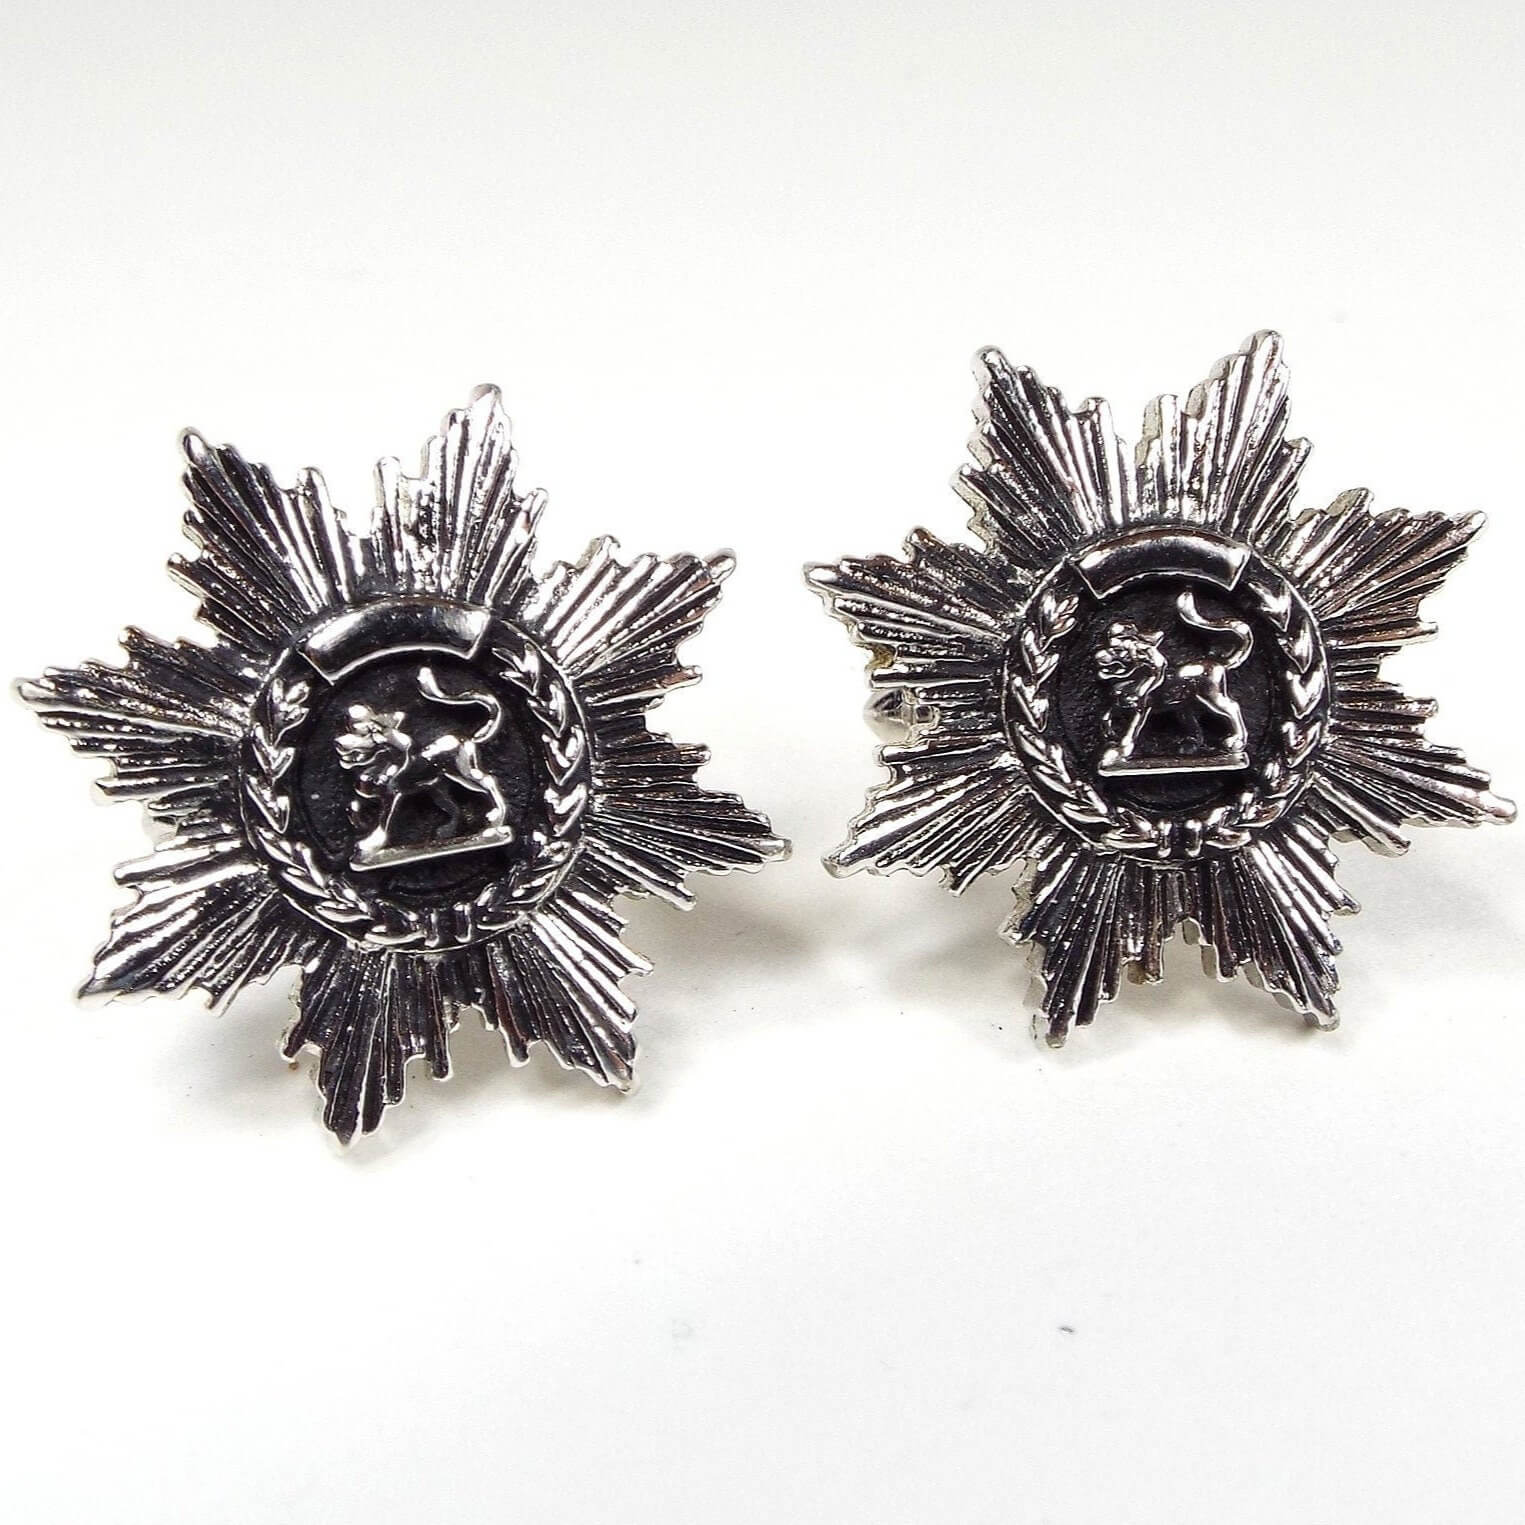 Front view of the Mid Century vintage Swank lion cufflinks. the metal is antiqued silver tone in color. There is a round area in the middle with a side view of a lion on a black painted background. There is a wheat style design curved around the bottom edge. All the way around the cufflinks is a brutalist starburst like area of line textured leaf like shapes. 